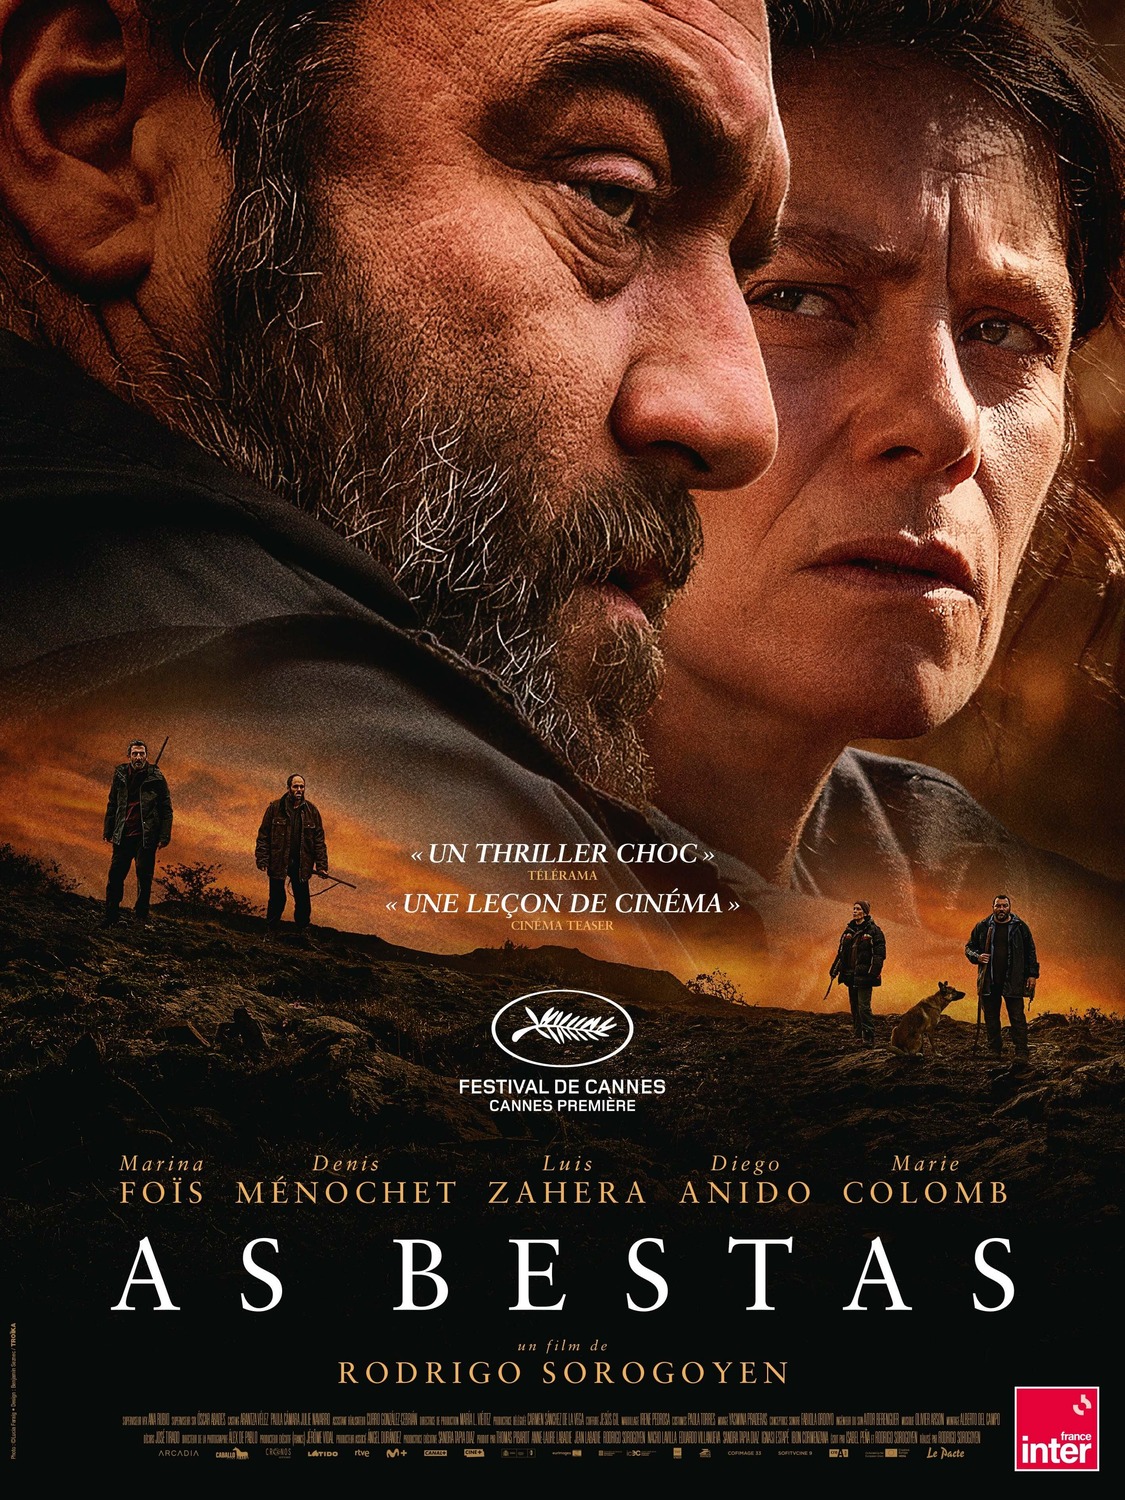 Extra Large Movie Poster Image for As bestas (#3 of 3)